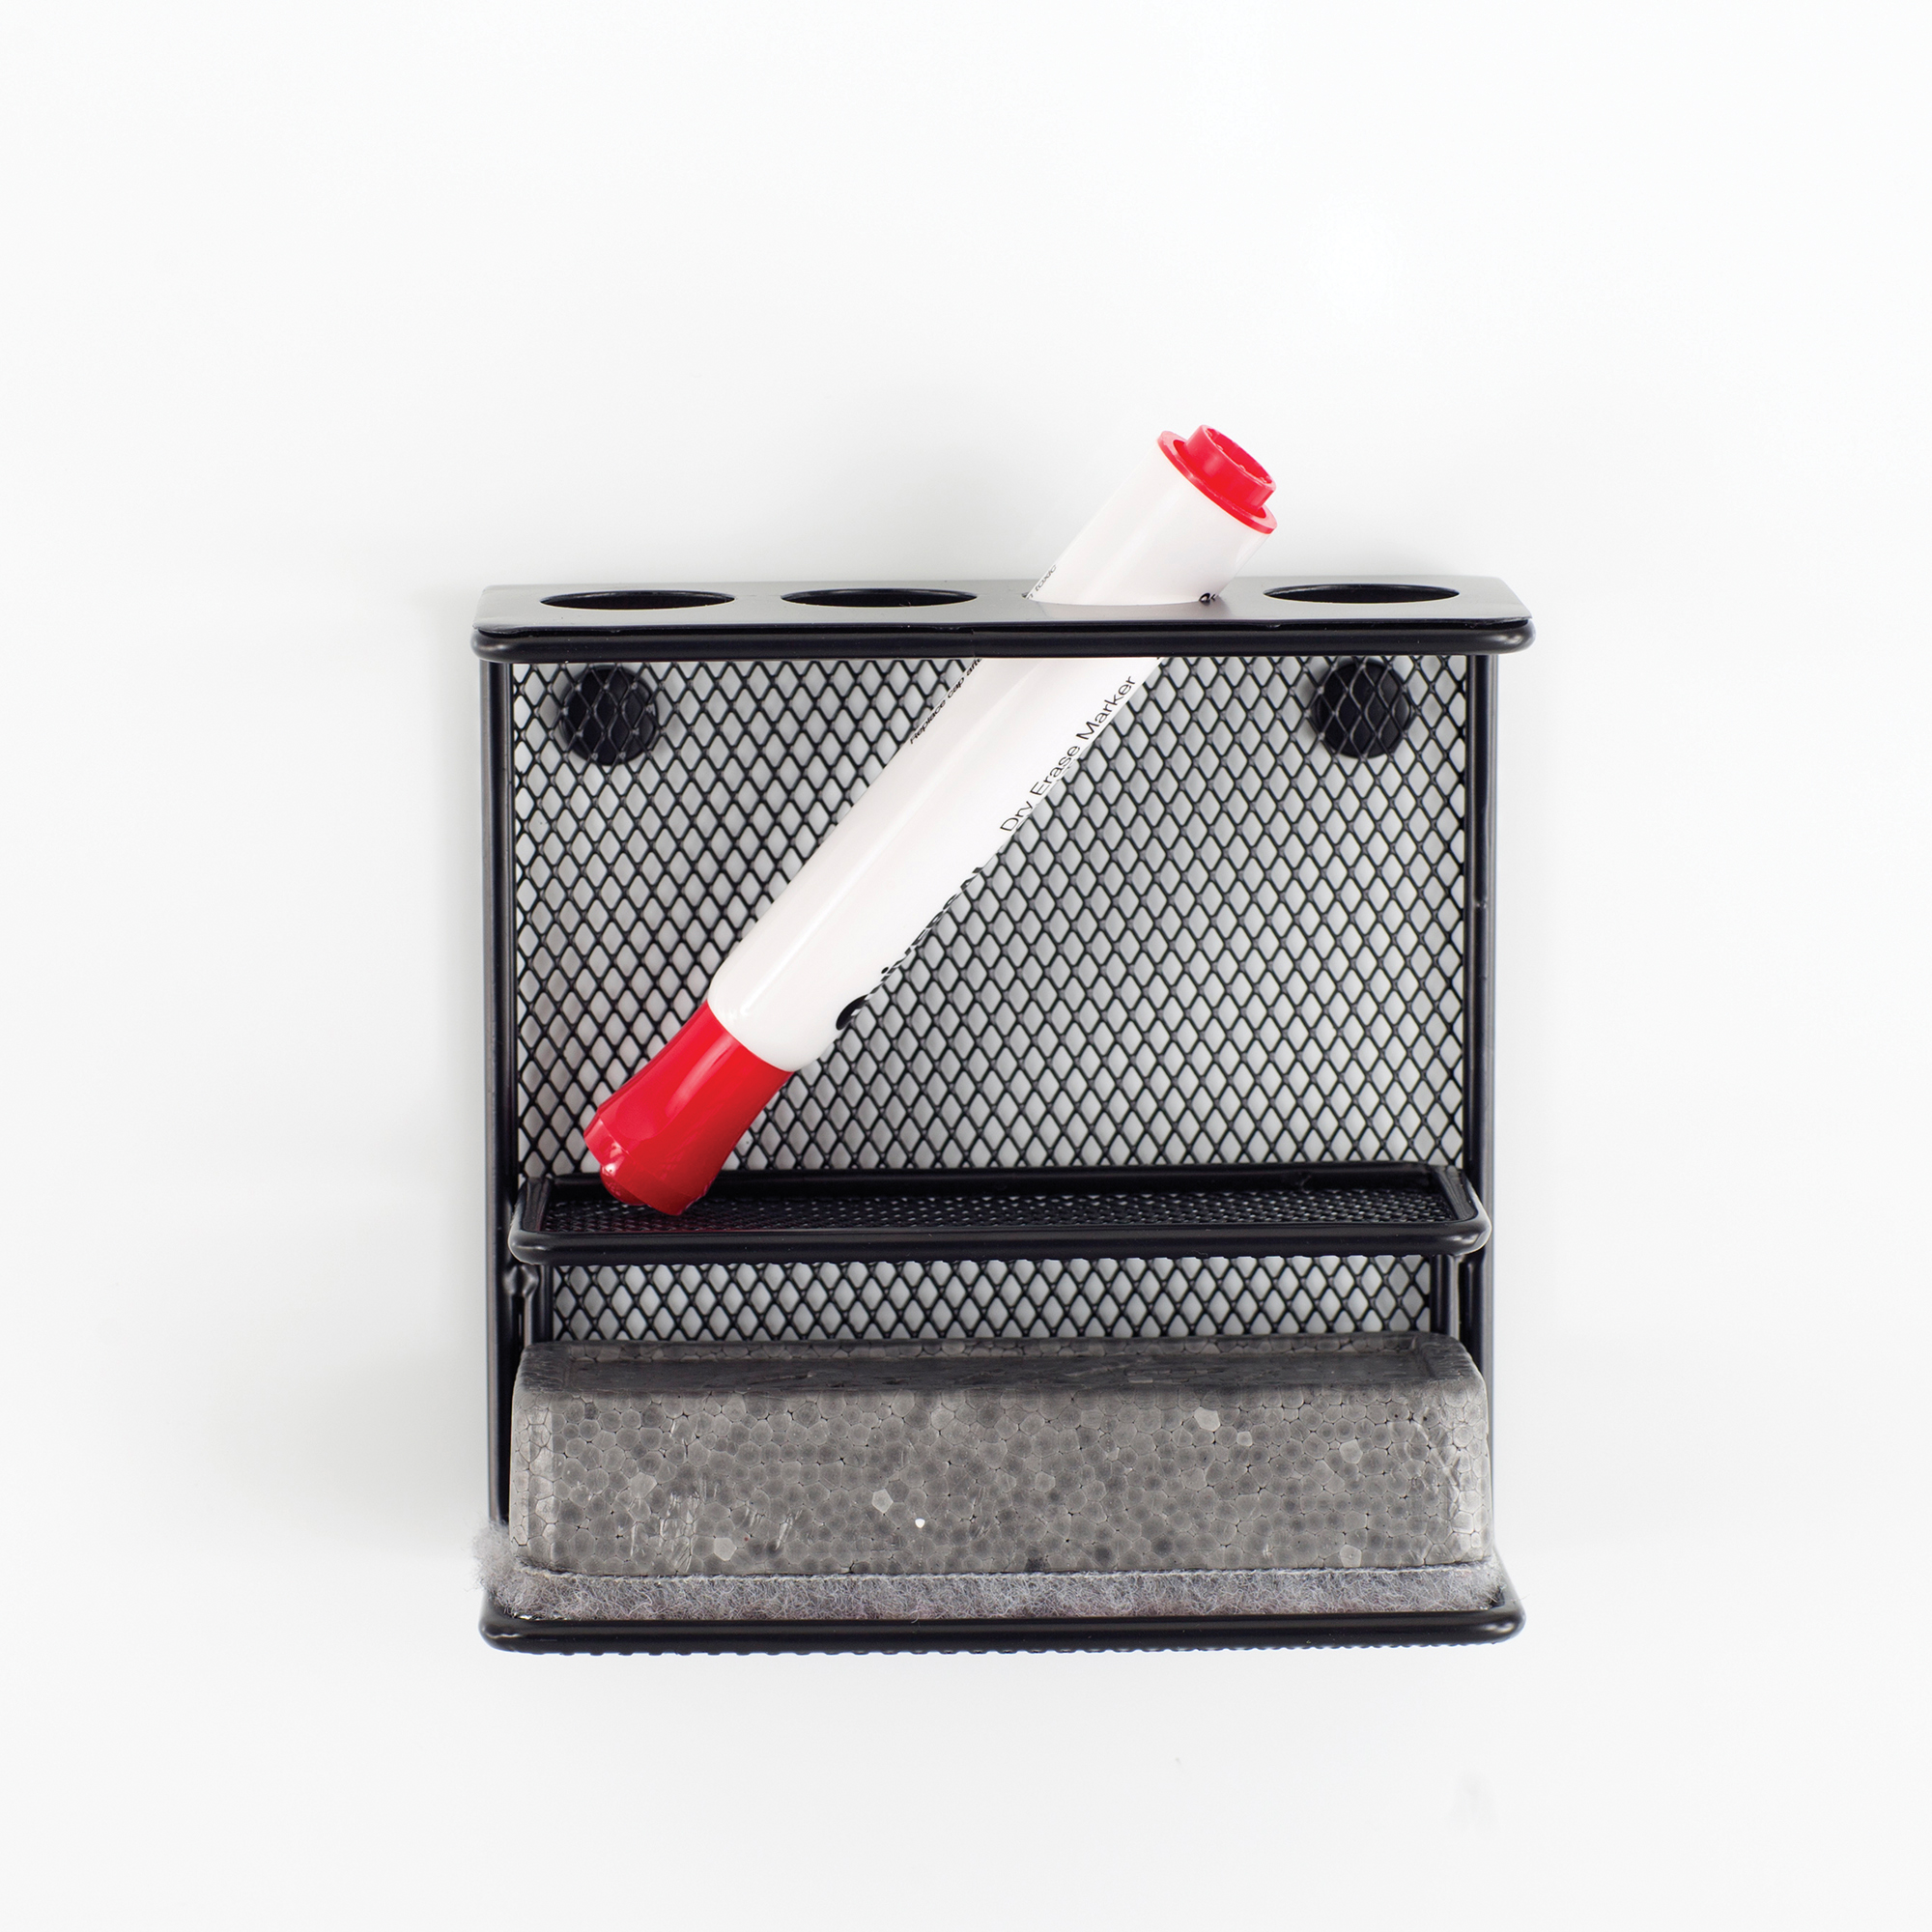 Onyx™ Mesh Holder with Shelf | Products